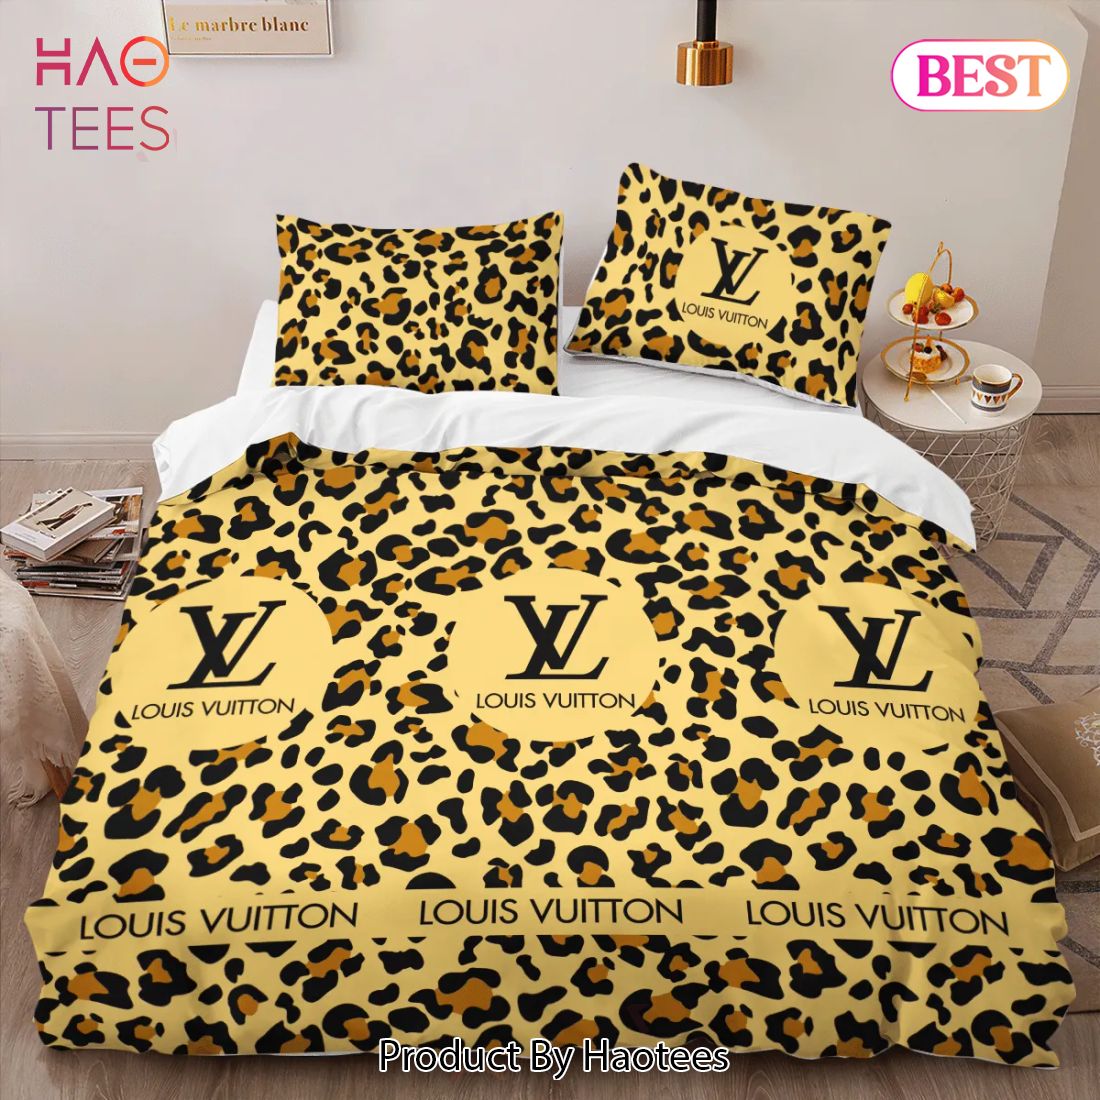 SALE] Louis Vuitton Yellow Limited Edition Luxury Brand Bedding